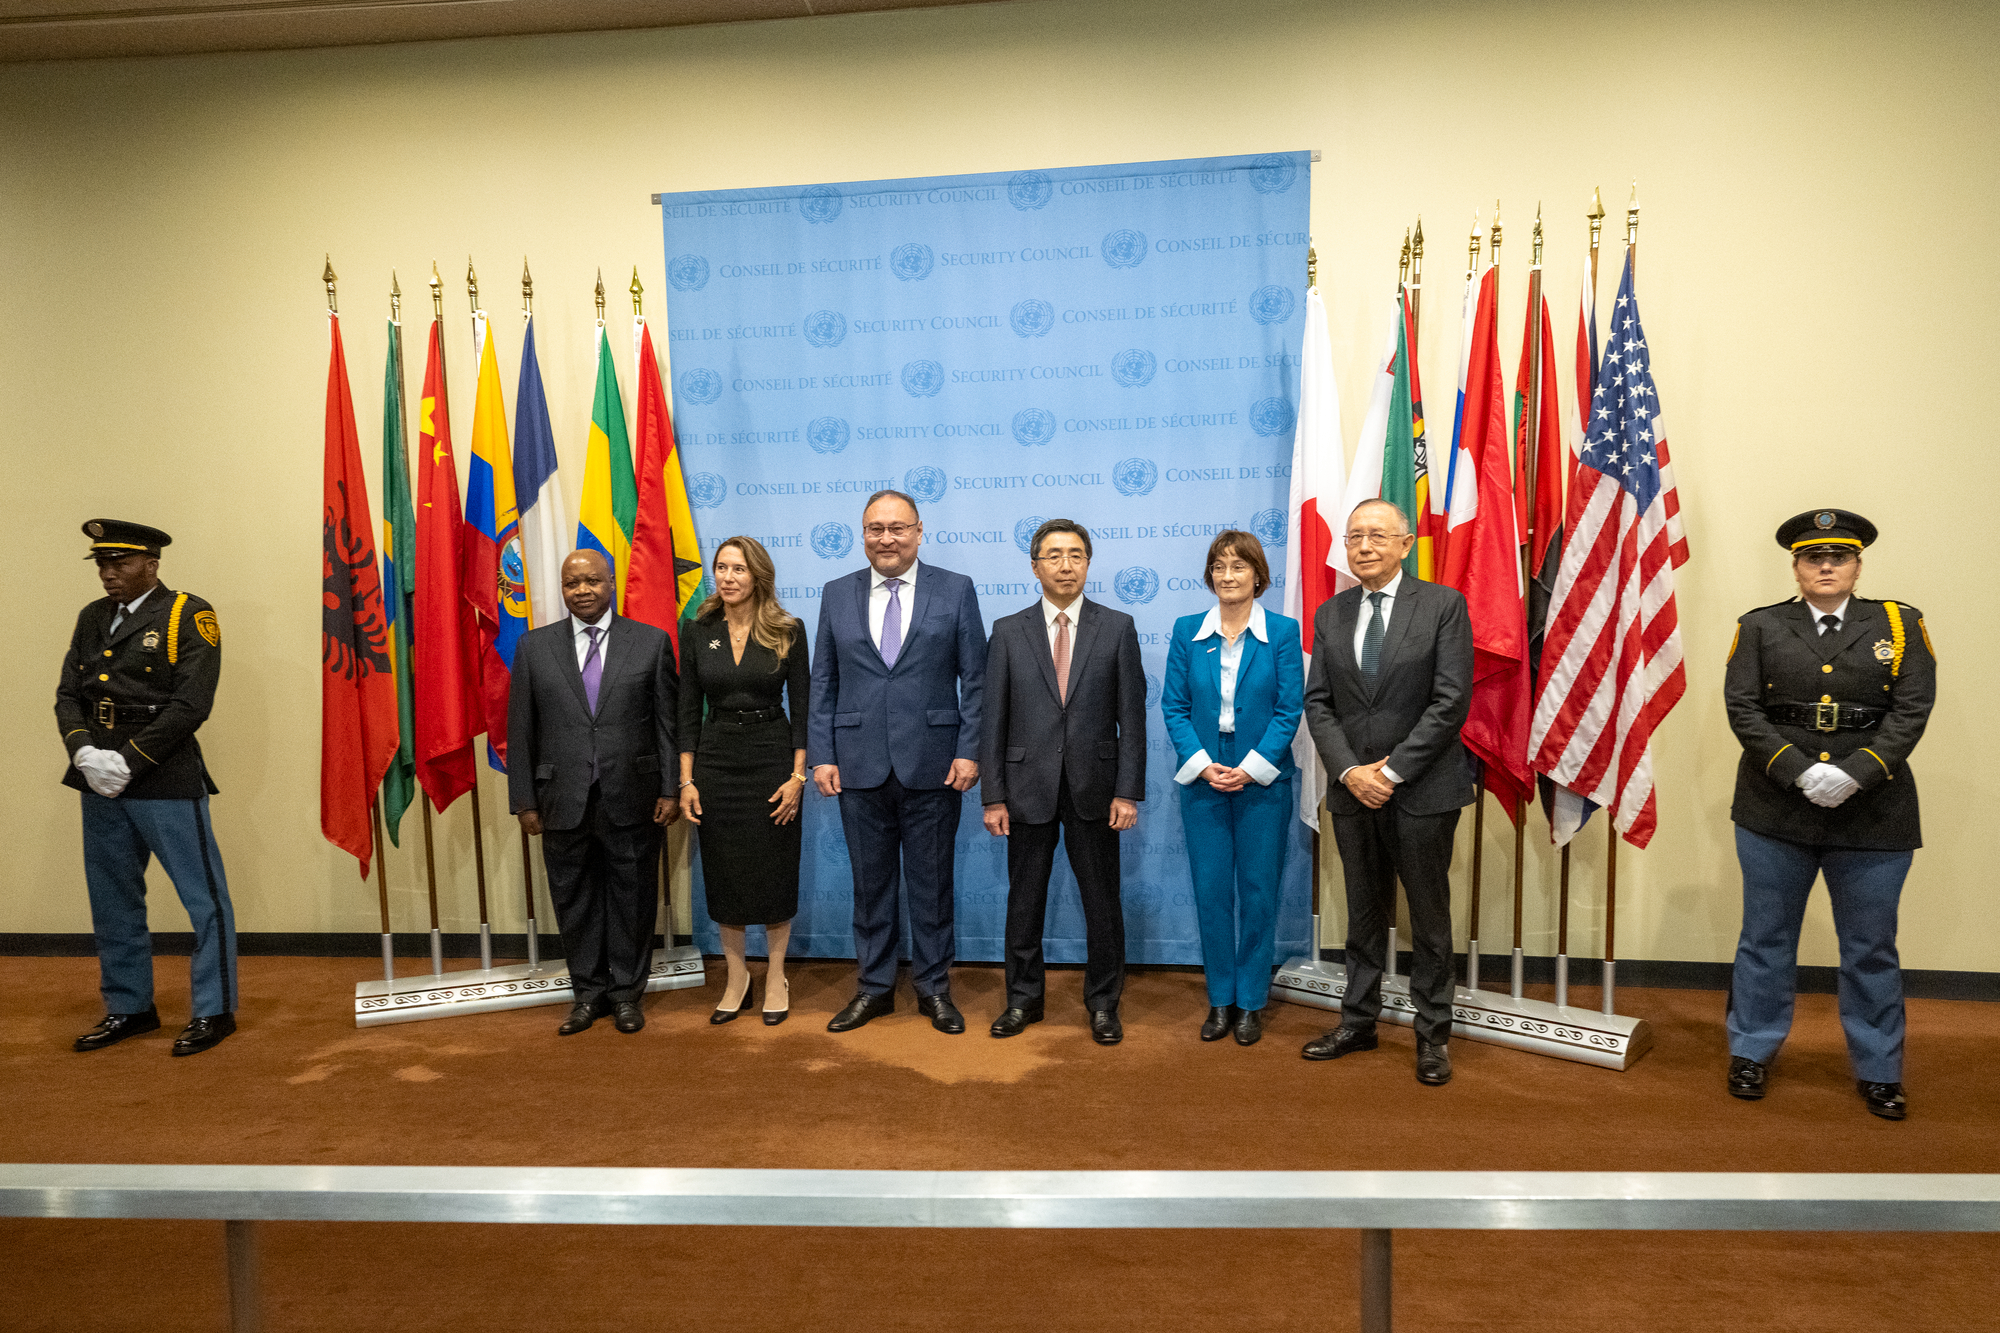 Kazakhstan held a flag installation ceremony of the new members of the UN Security Council in New York